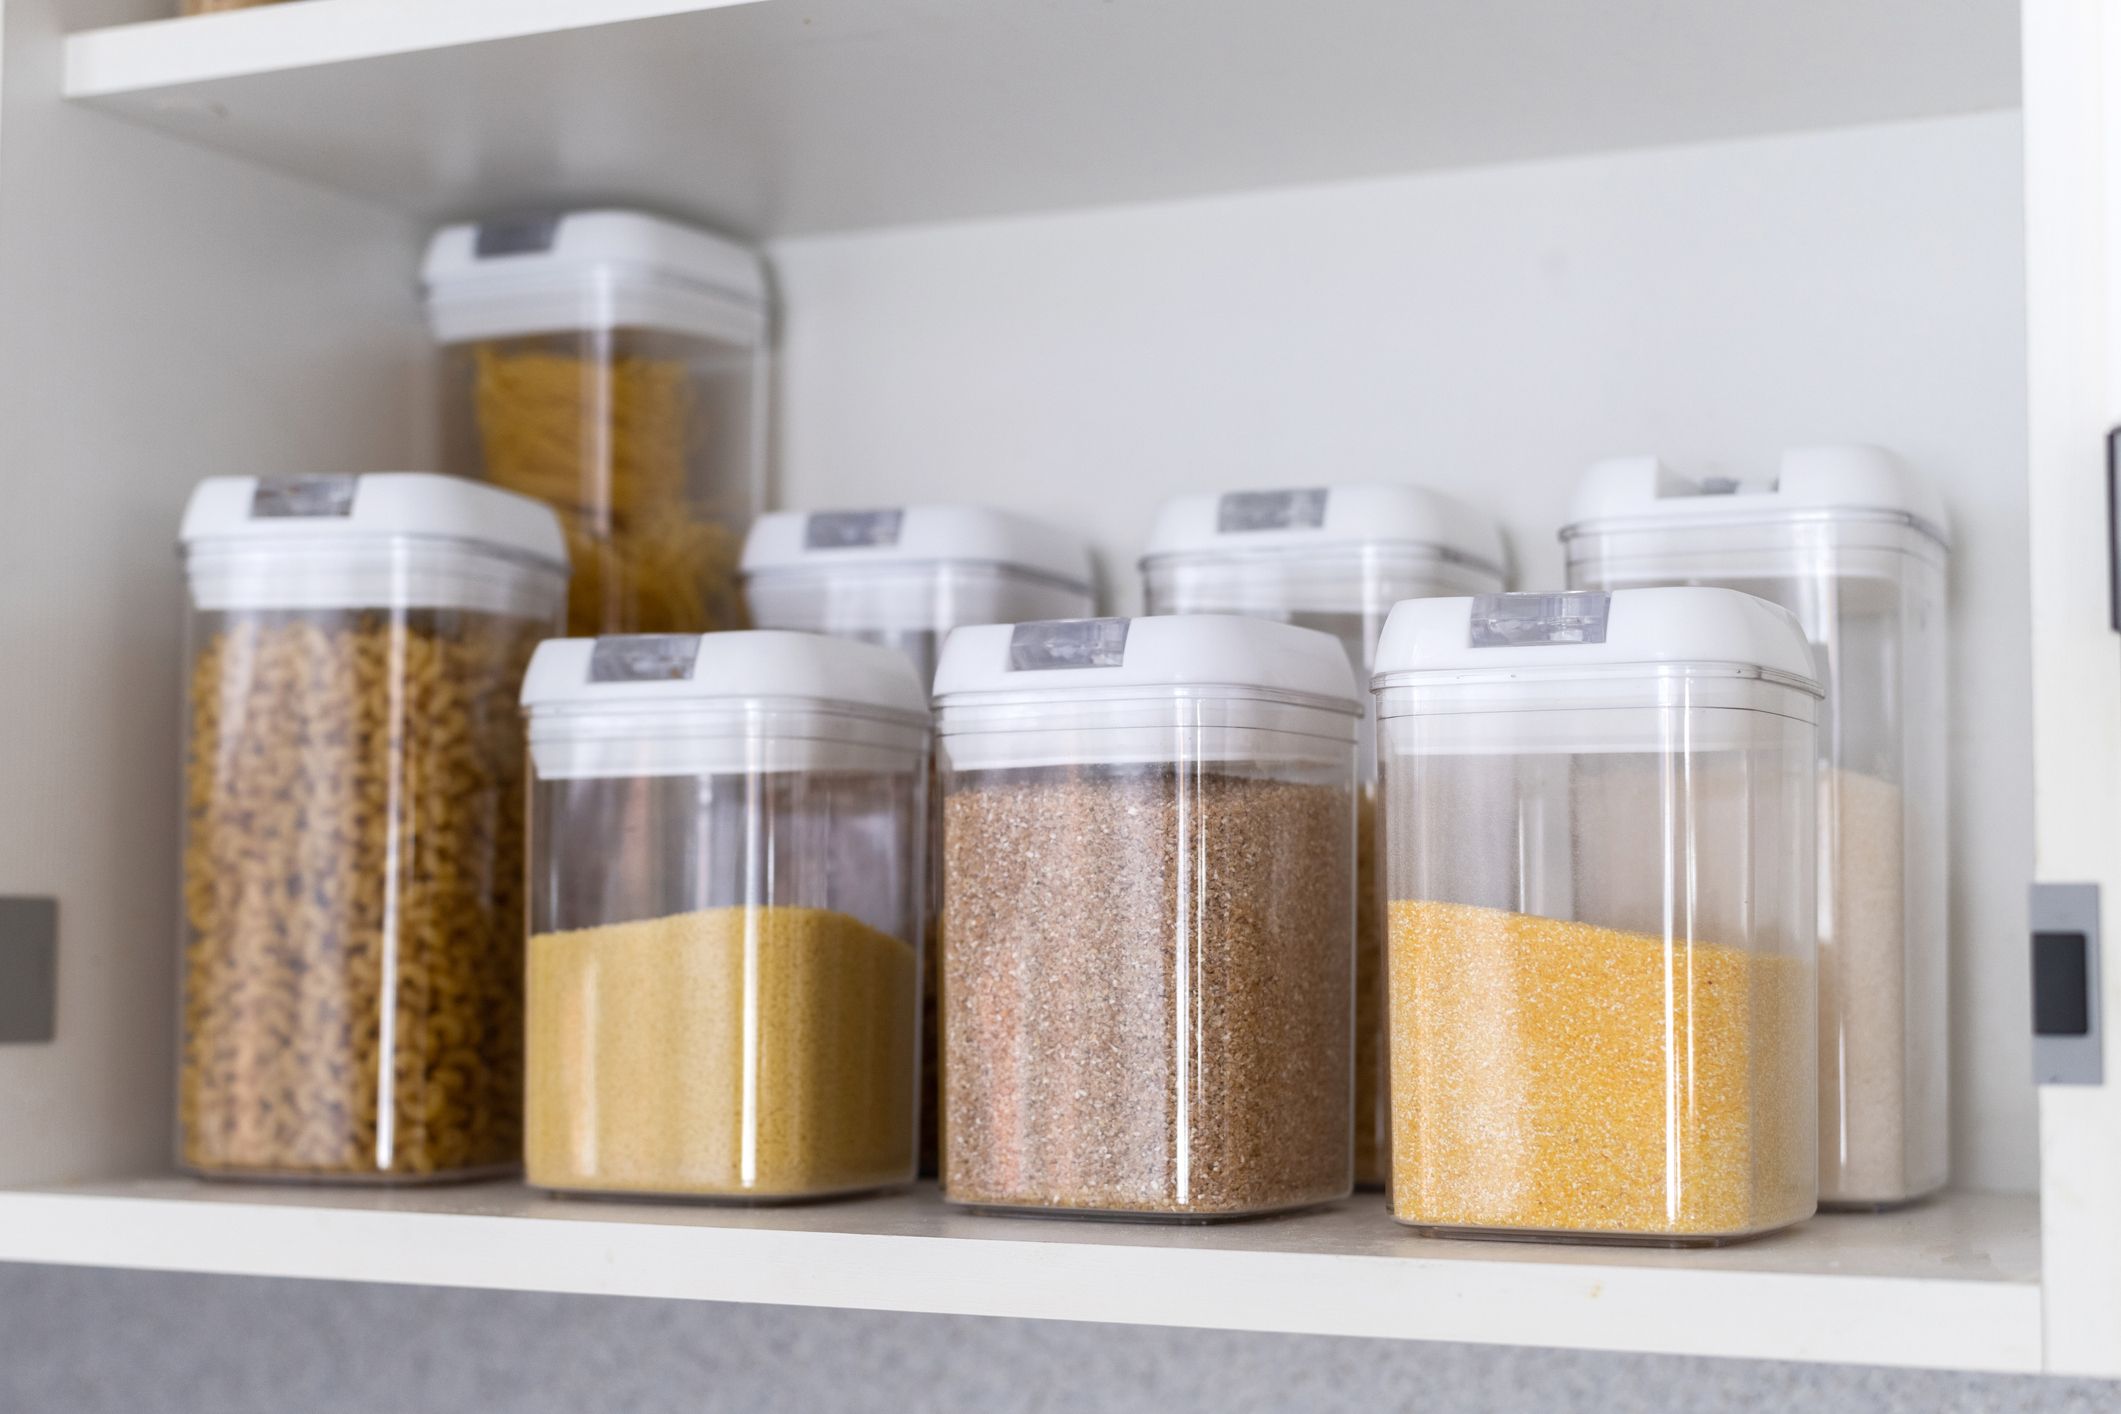 Should You Really Decant Every Pantry Item Into Storage Containers